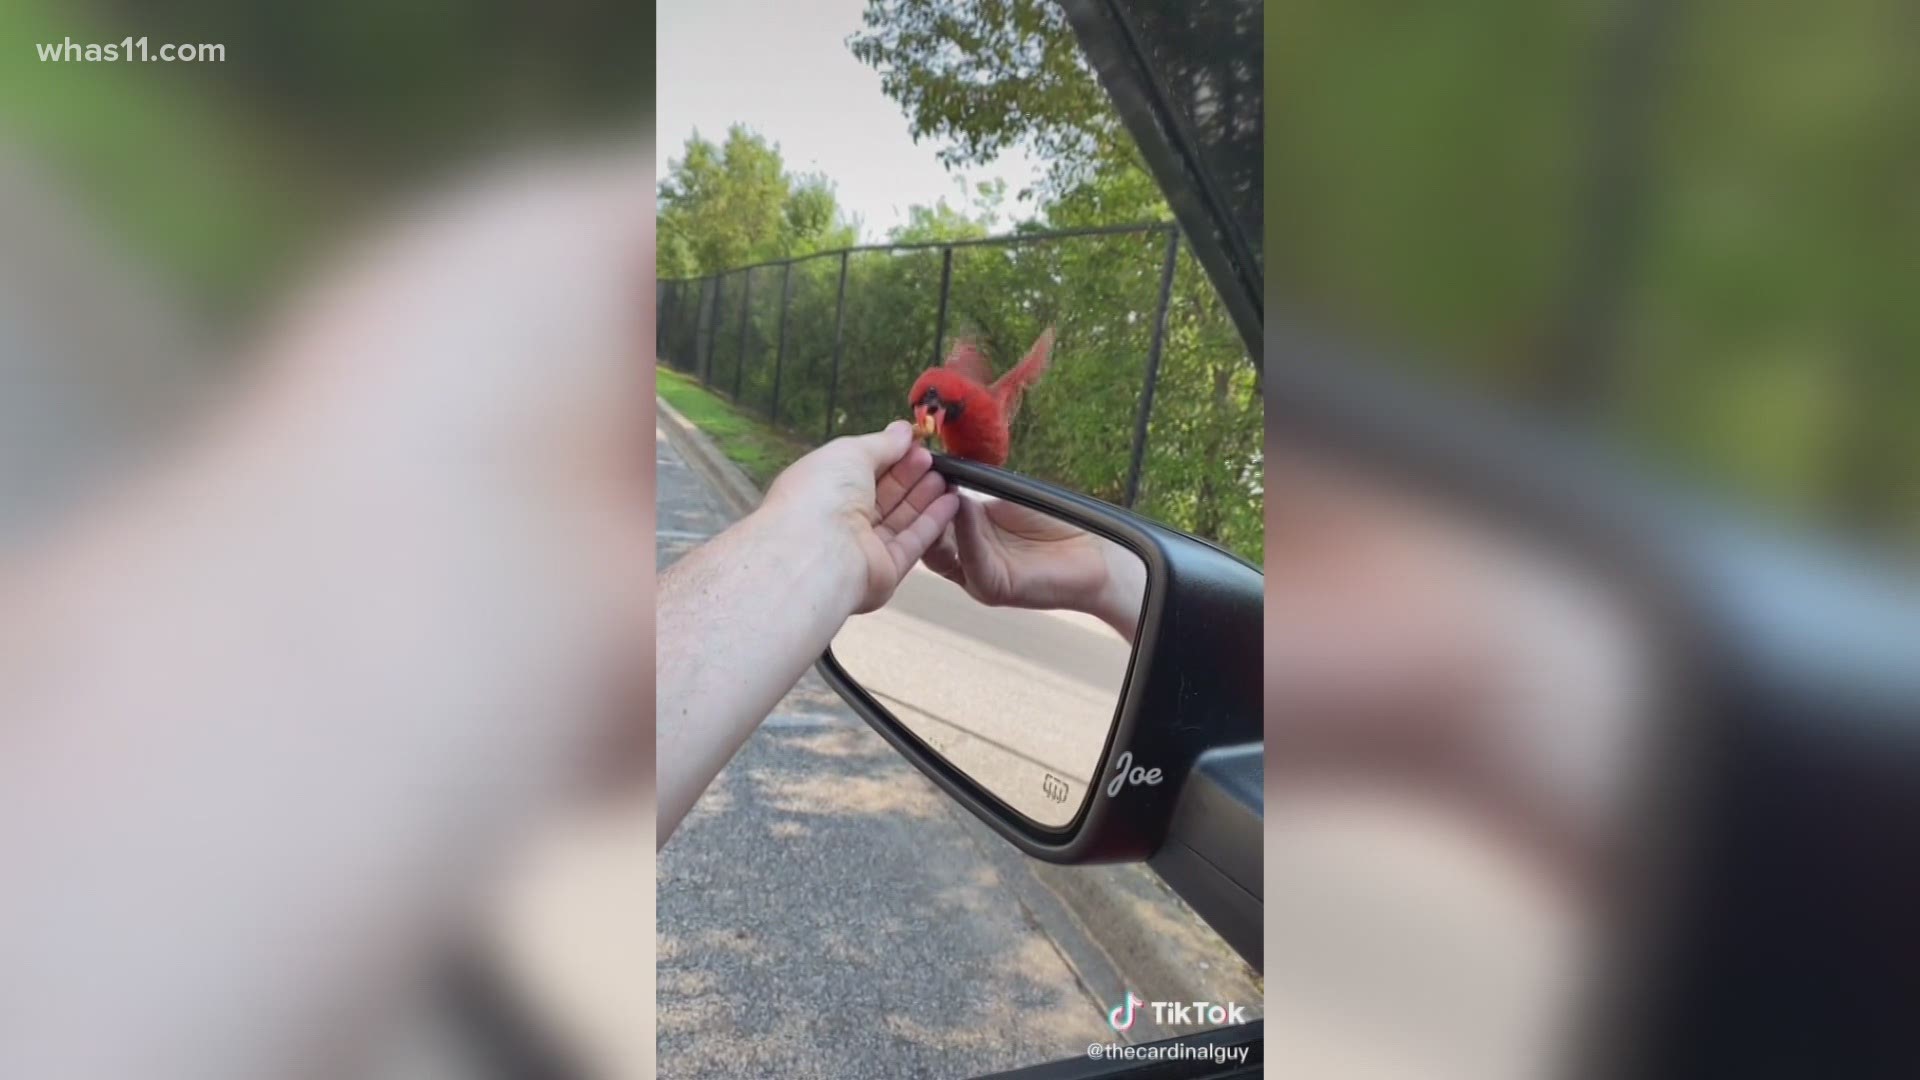 With over a million views on TikTok, Joe Castello is known as the "Cardinal Guy," because of his feathered friend, Siva. Their unique relationship has garnered a lot